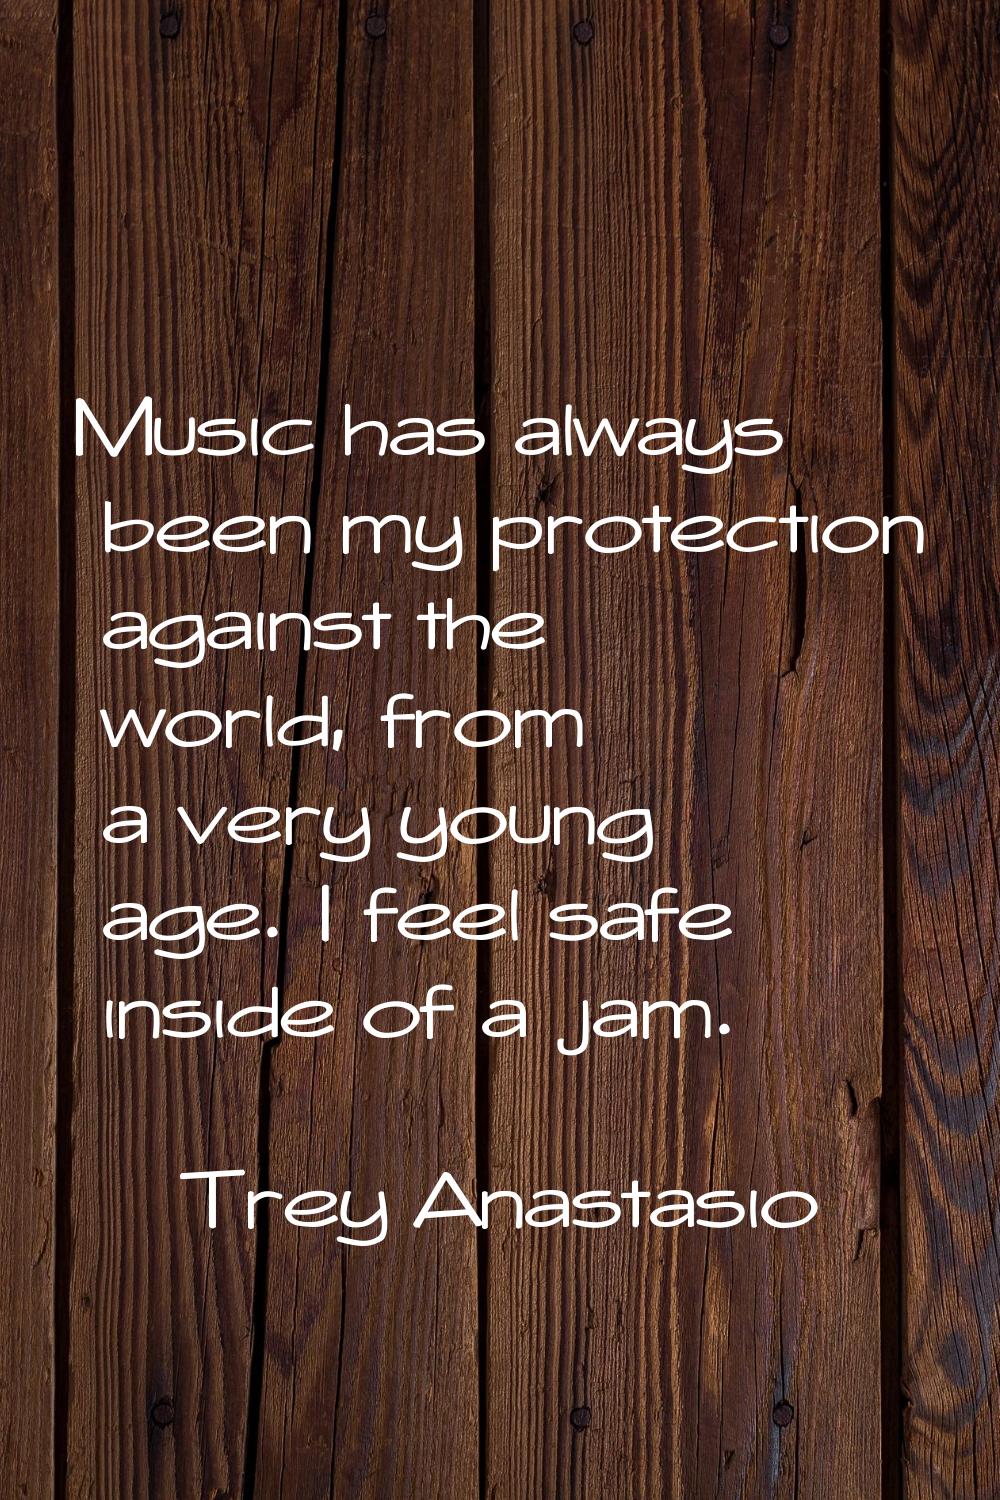 Music has always been my protection against the world, from a very young age. I feel safe inside of